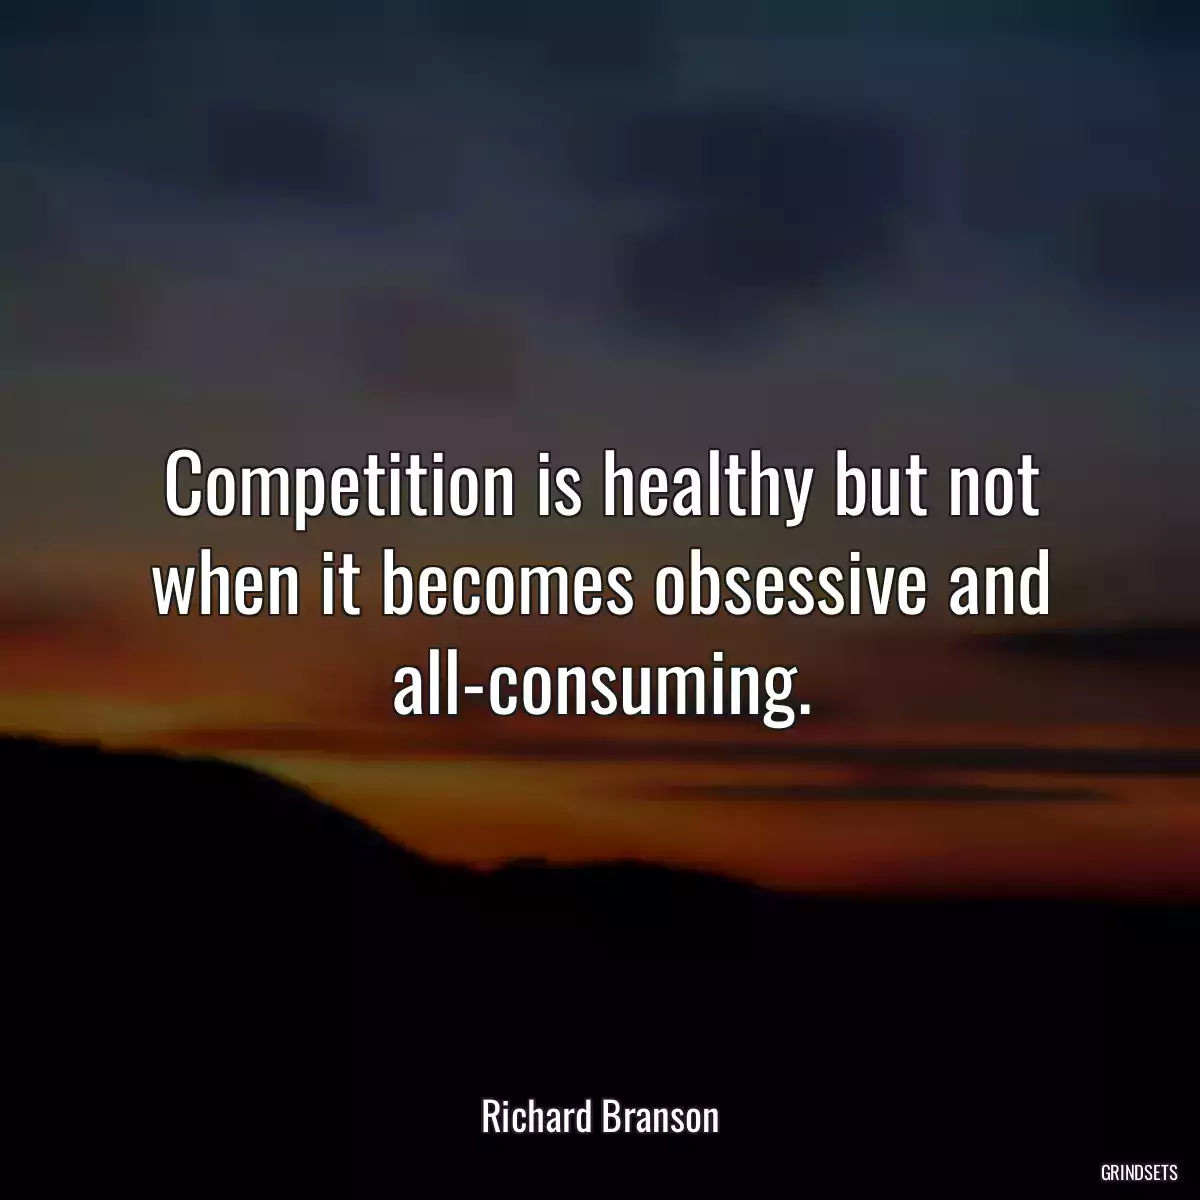 Competition is healthy but not when it becomes obsessive and all-consuming.